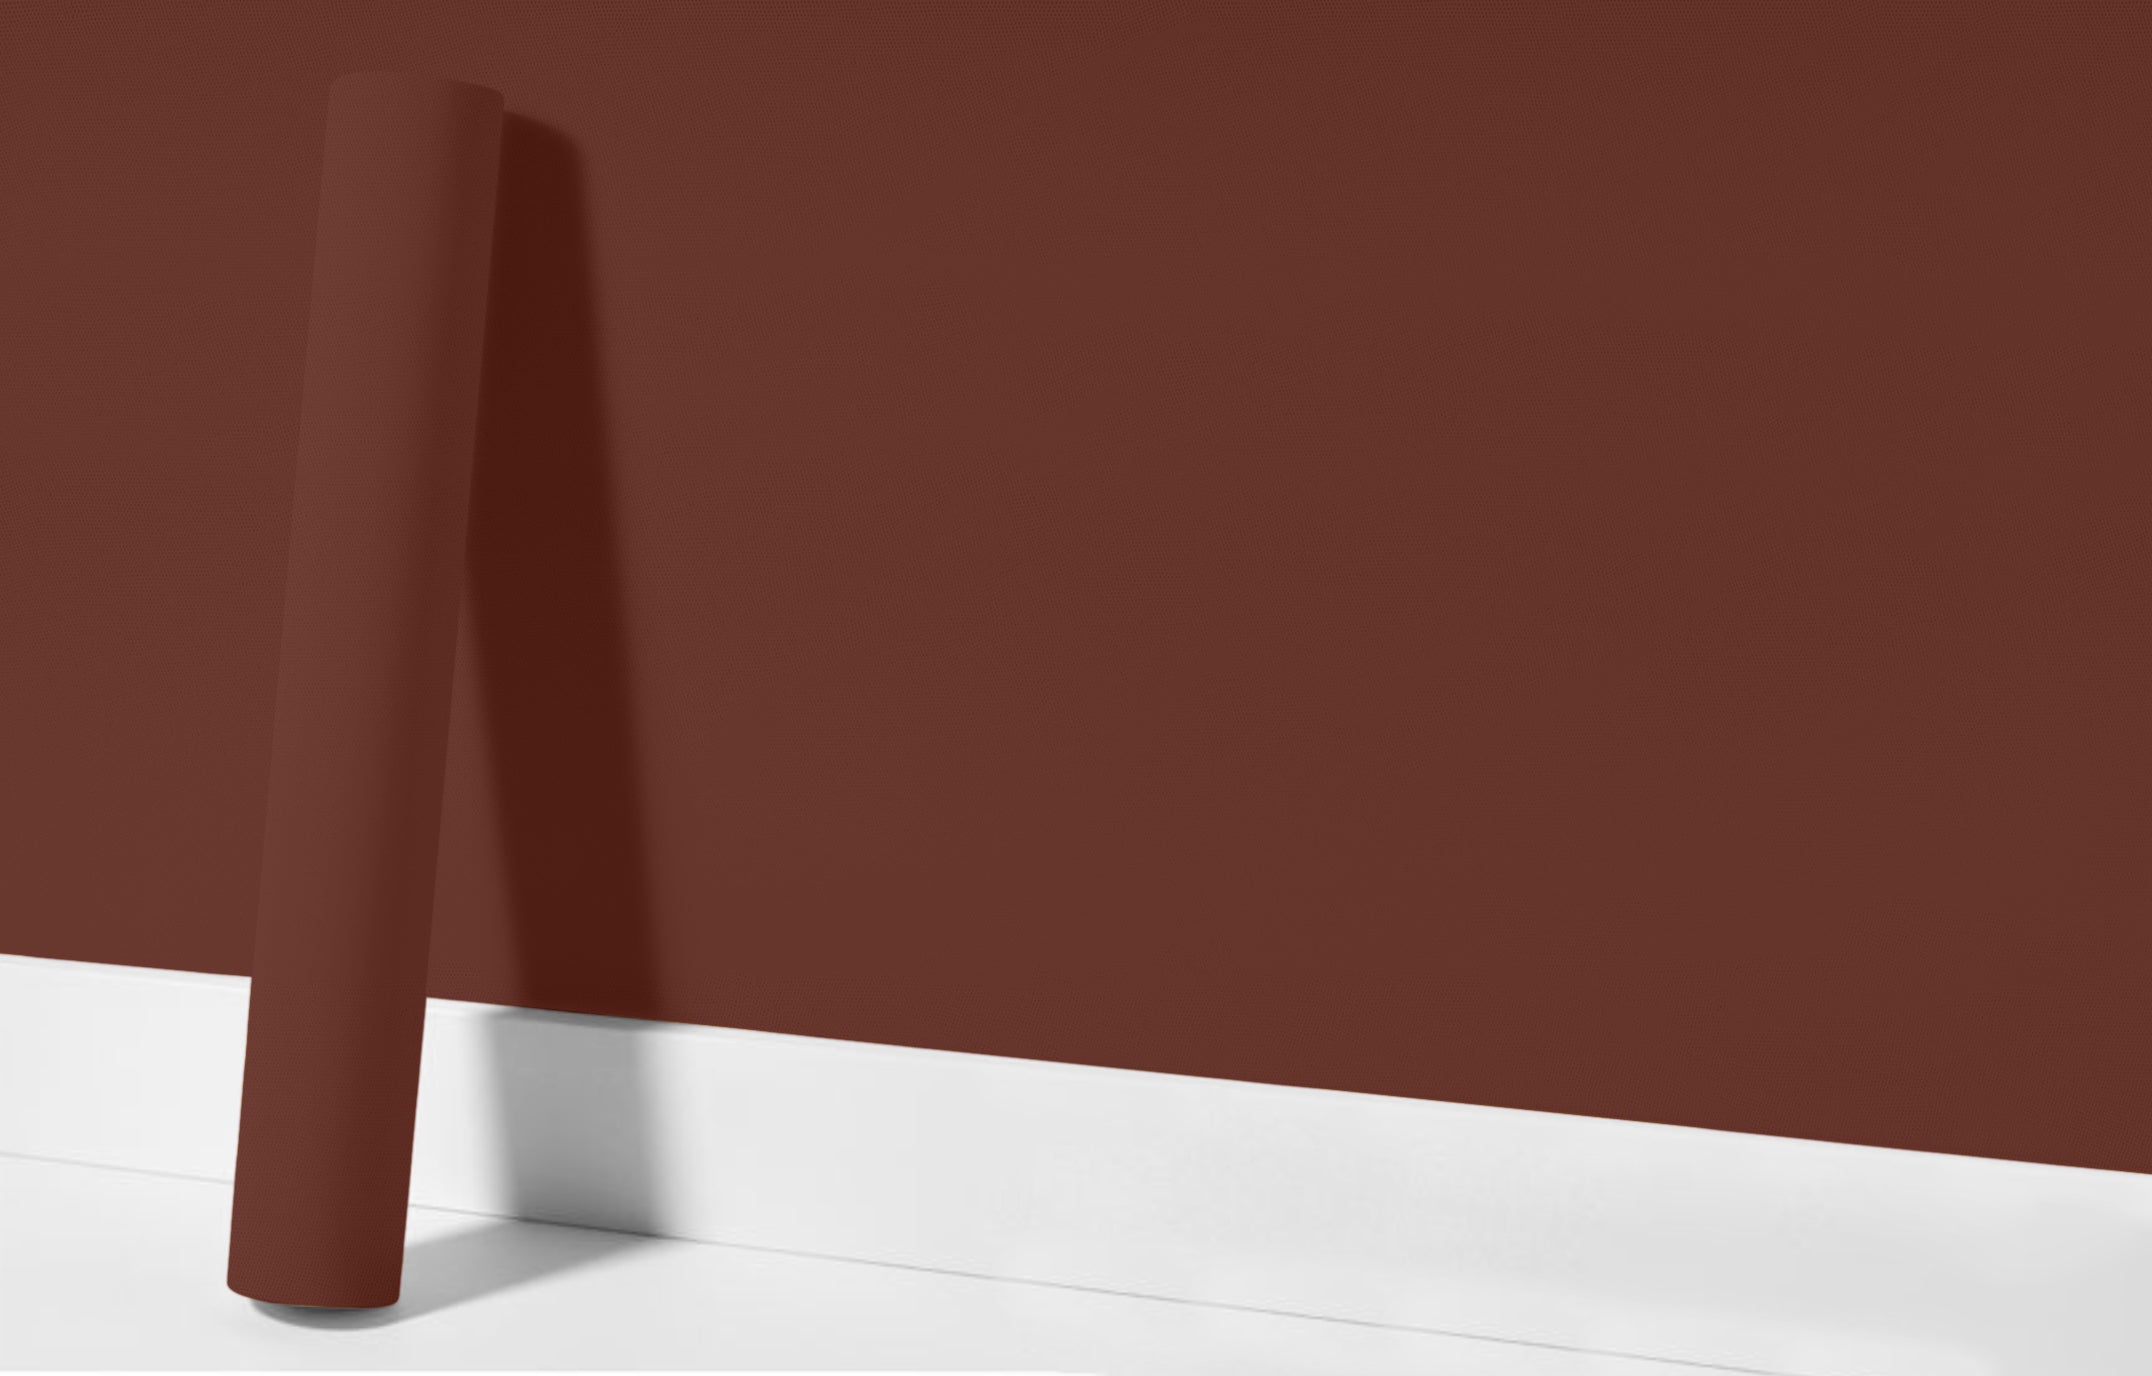 Peel & Stick Removable Re-usable Paint - Color RAL 8012 Red Brown - offRAL™ - RALRAW LLC, USA